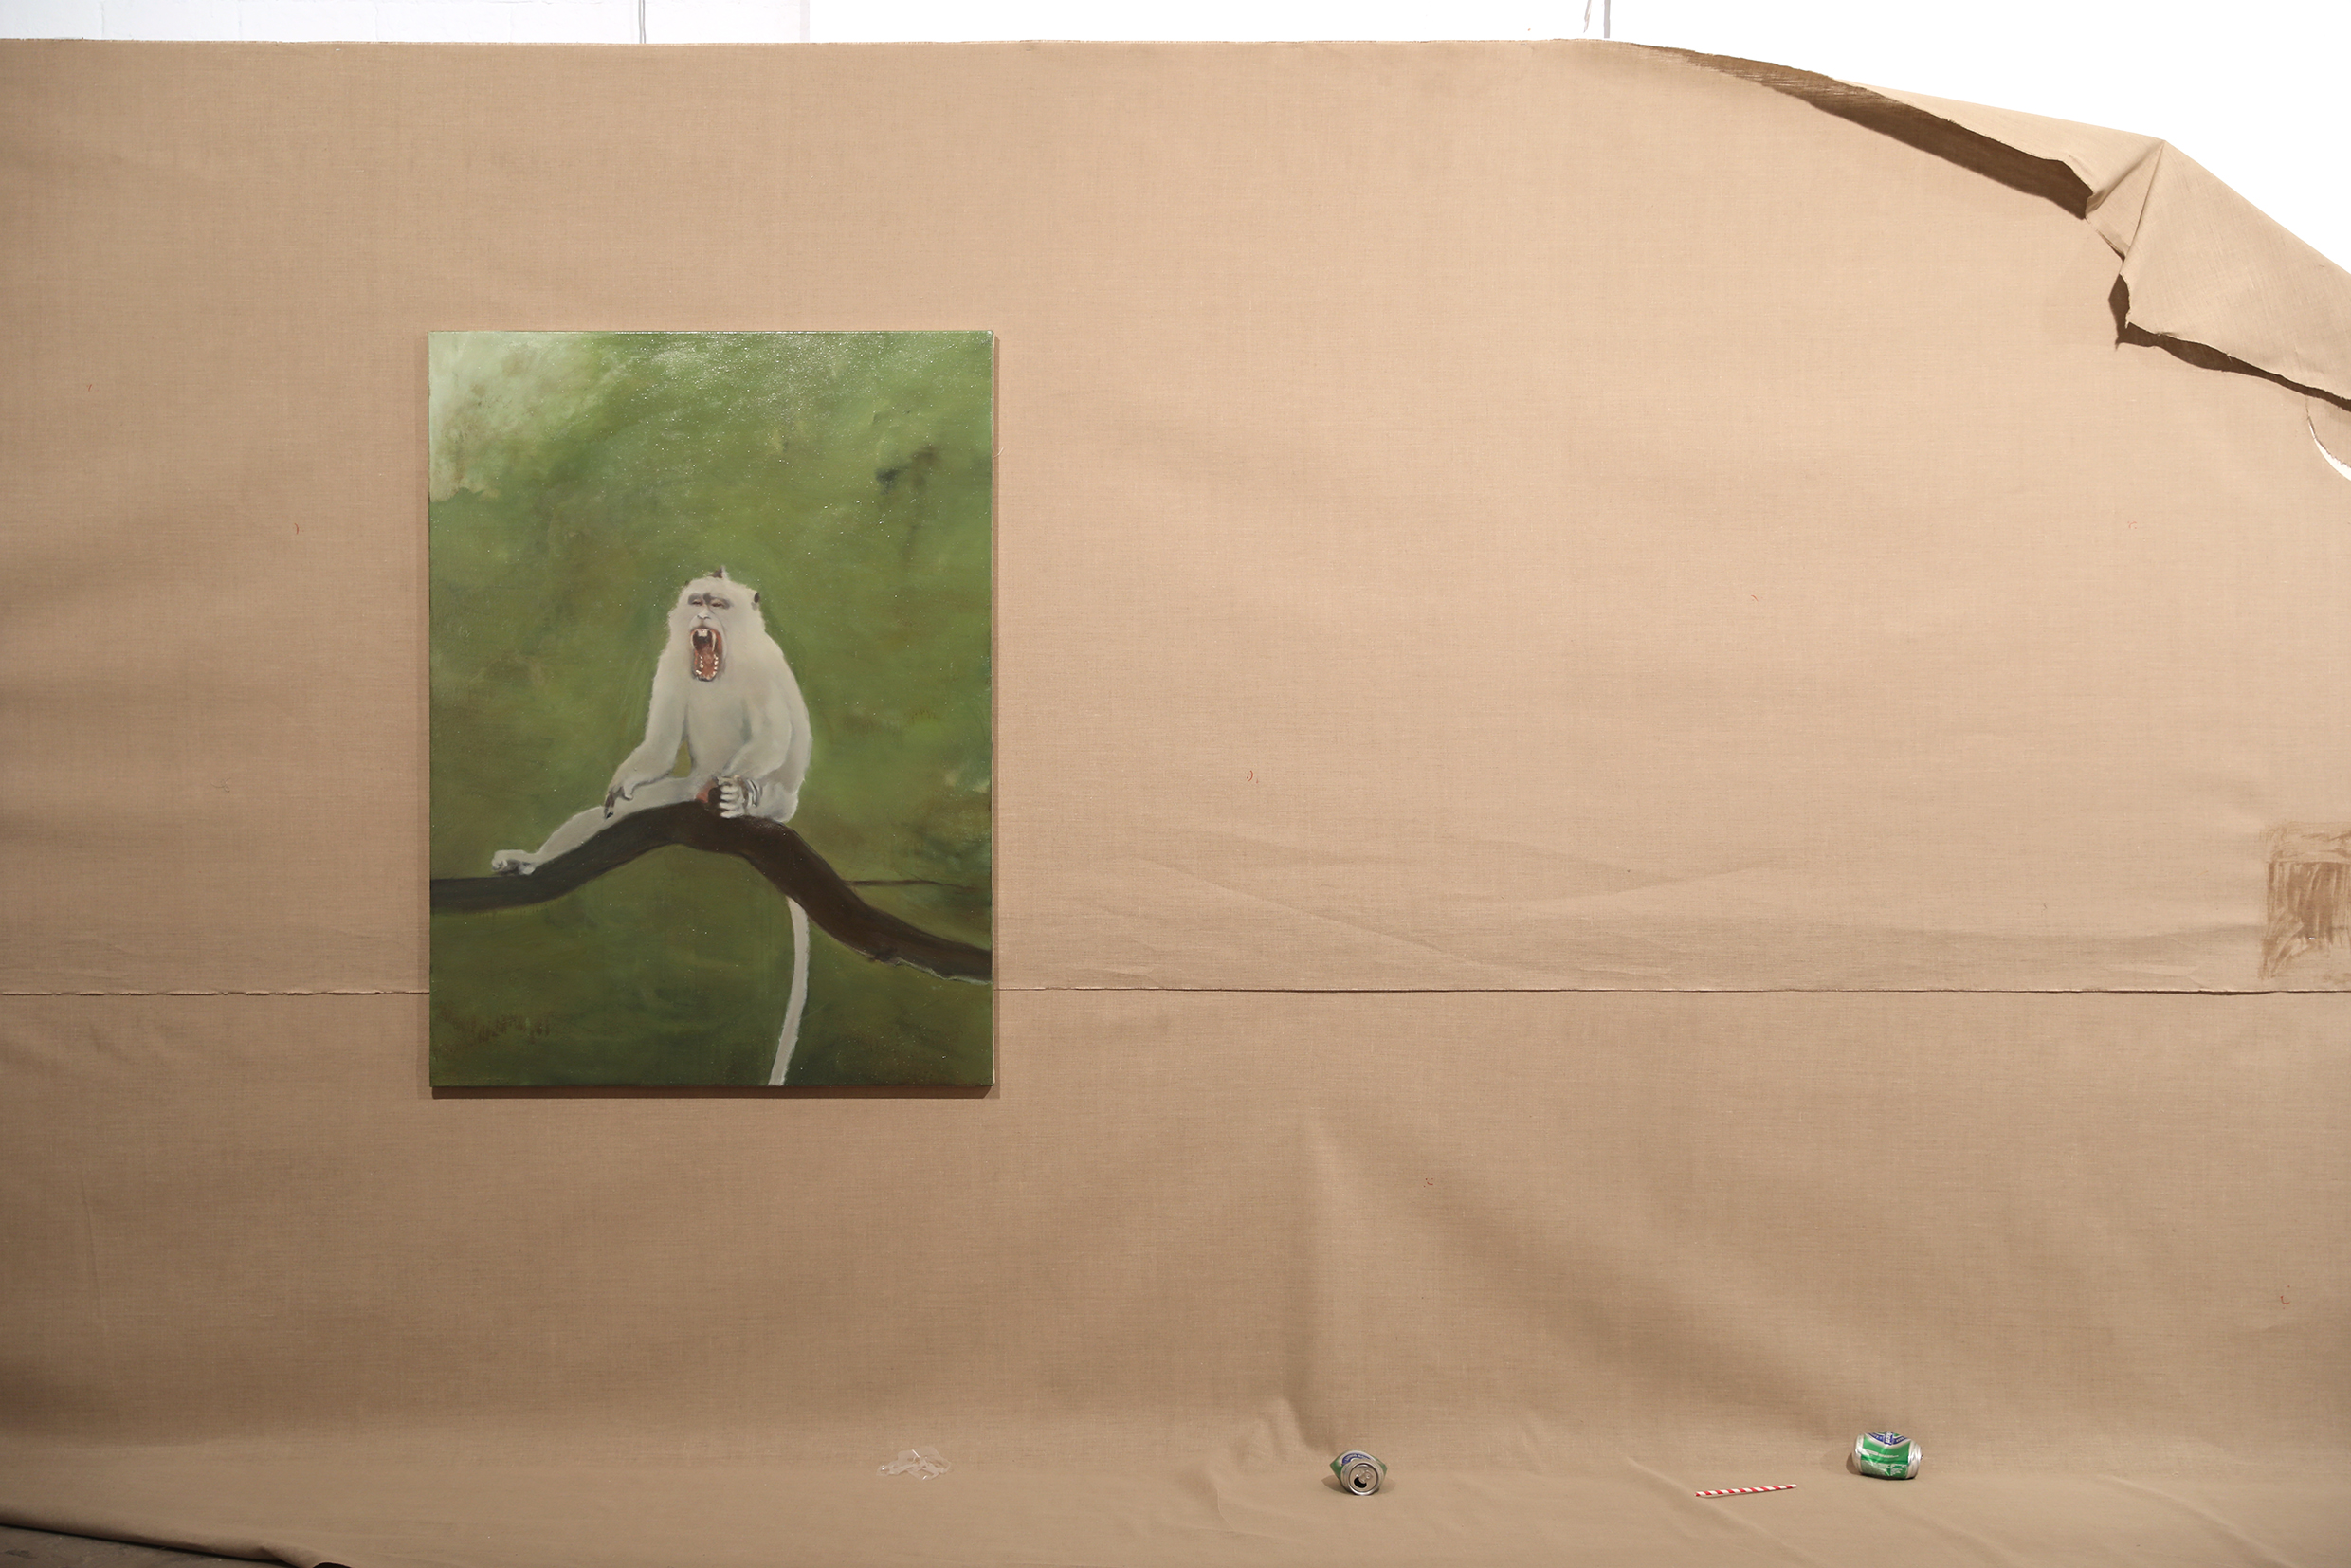  ‘The Mark (Macaca fascicularis)’ 2019, oil on canvas 